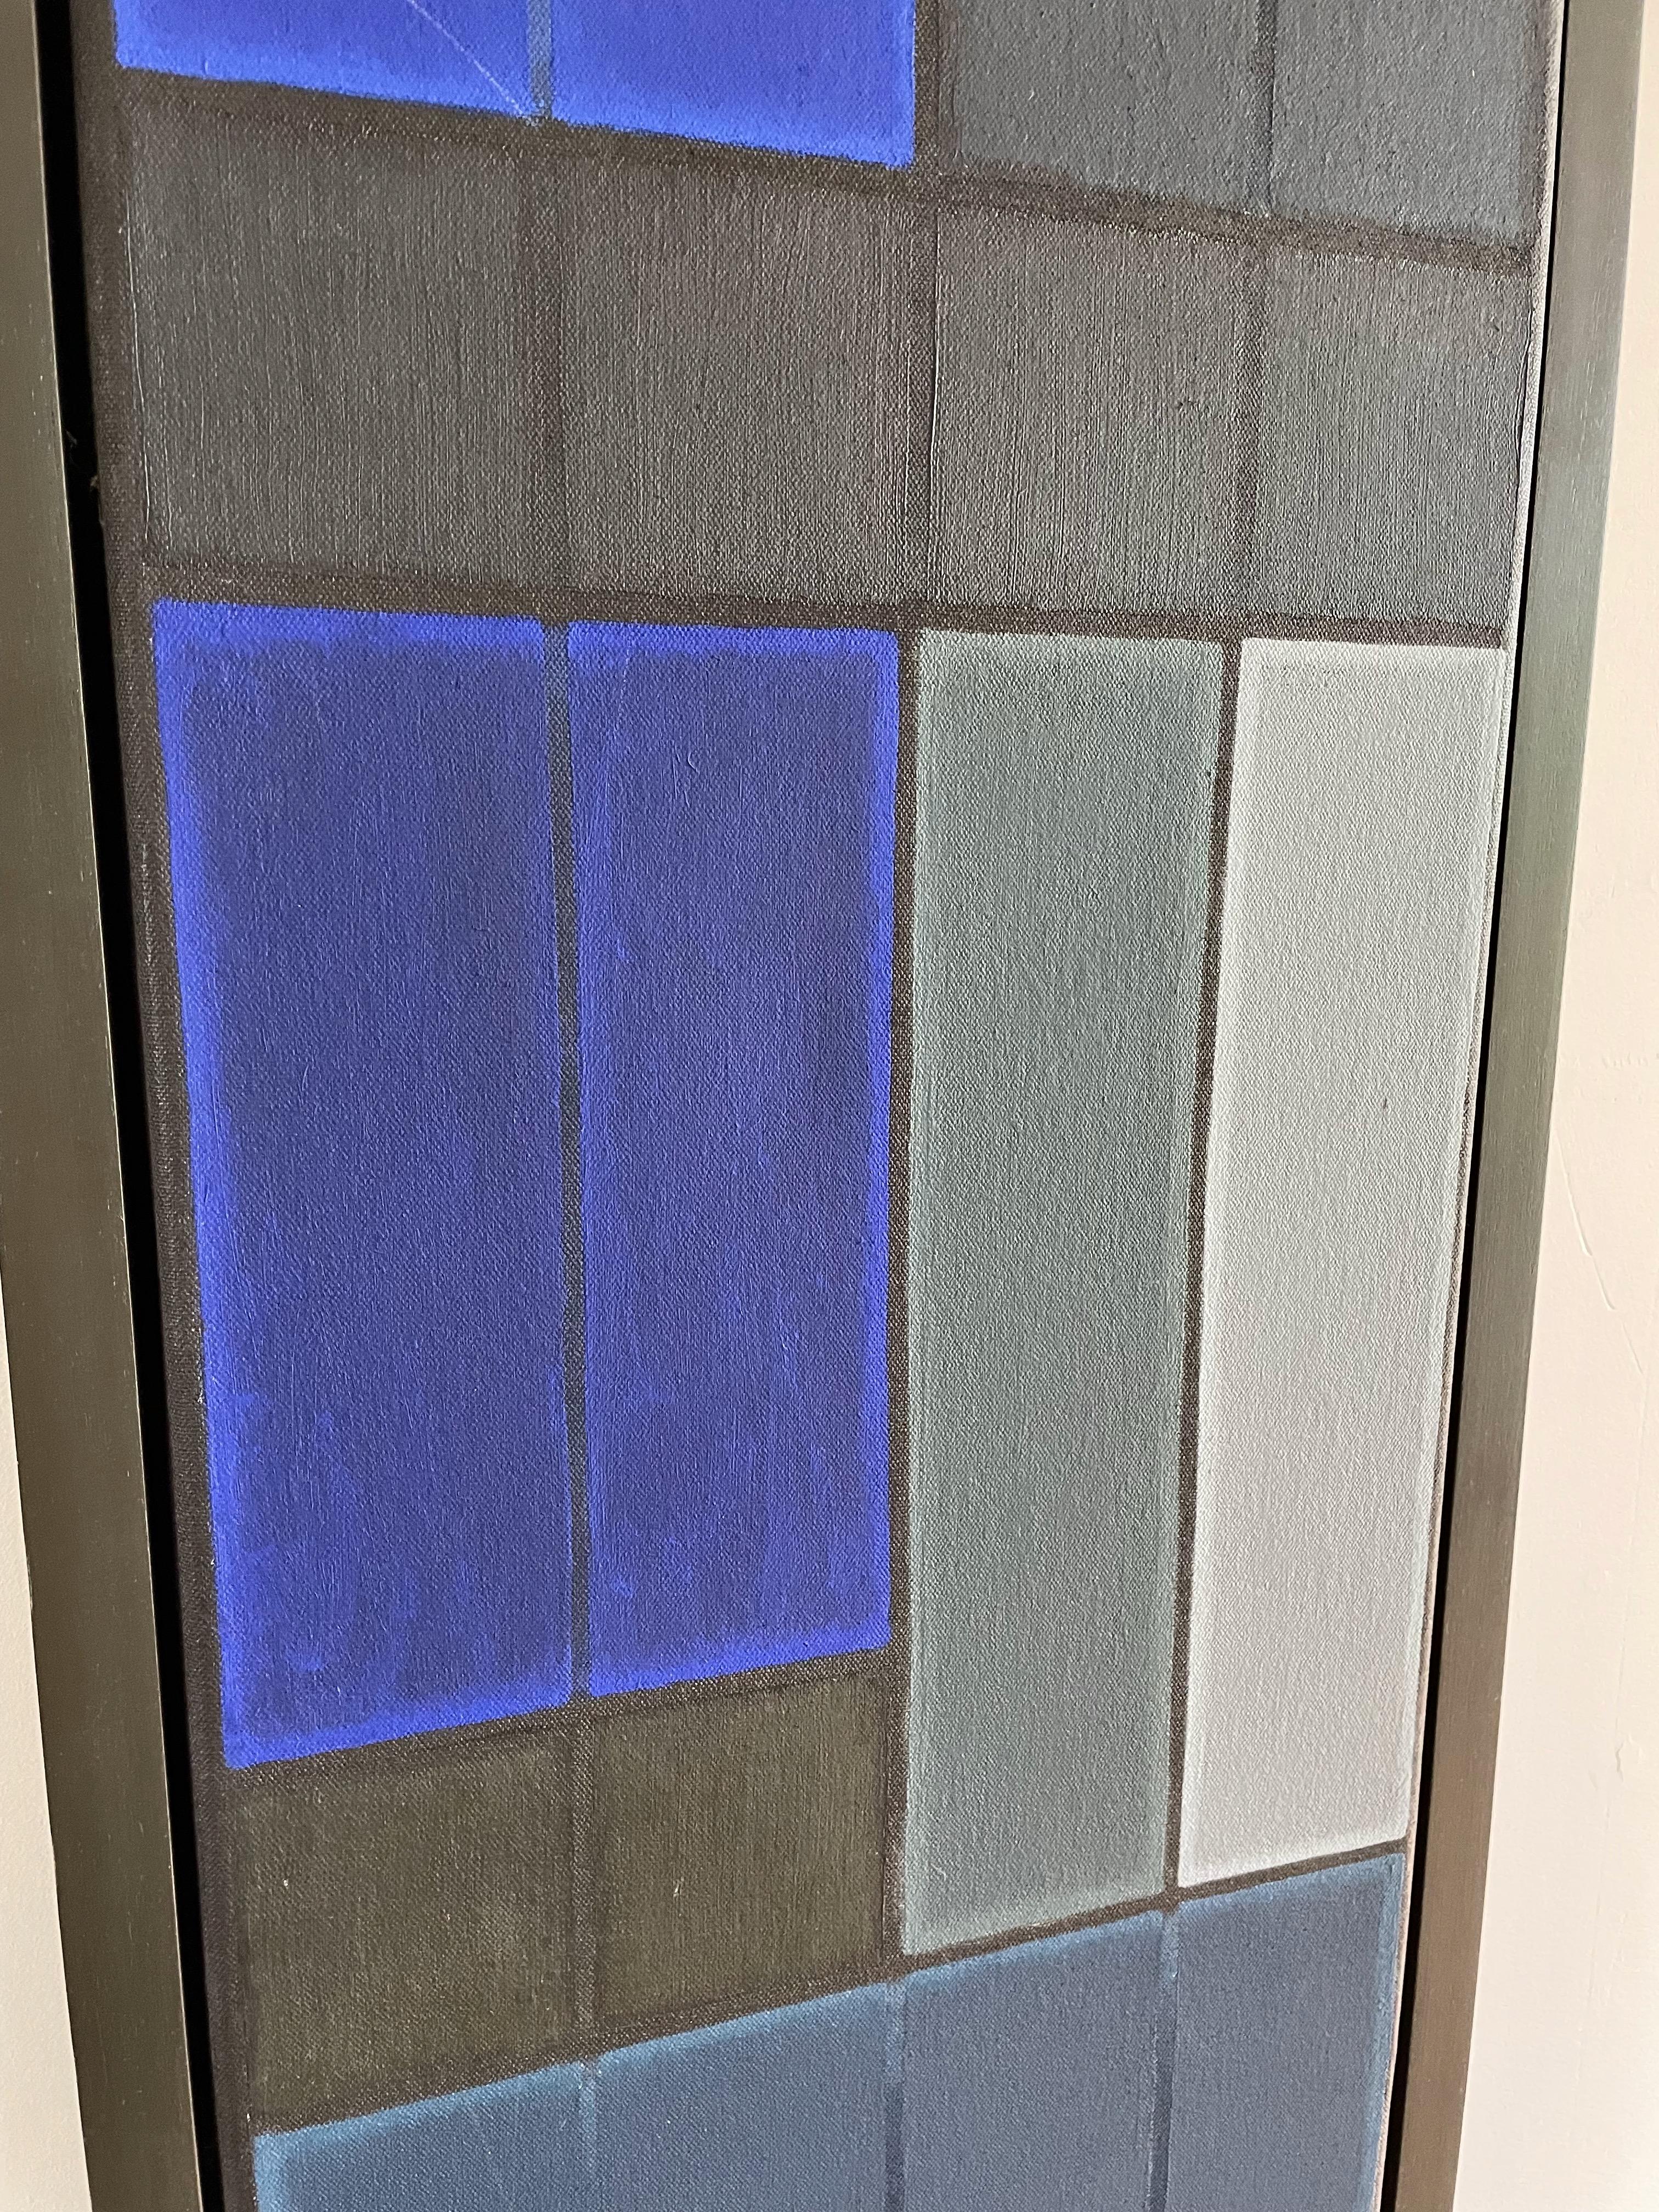 Untitled Blue Abstract Number 2.  Geometric Oil Painting - Gray Abstract Painting by John Hopwood